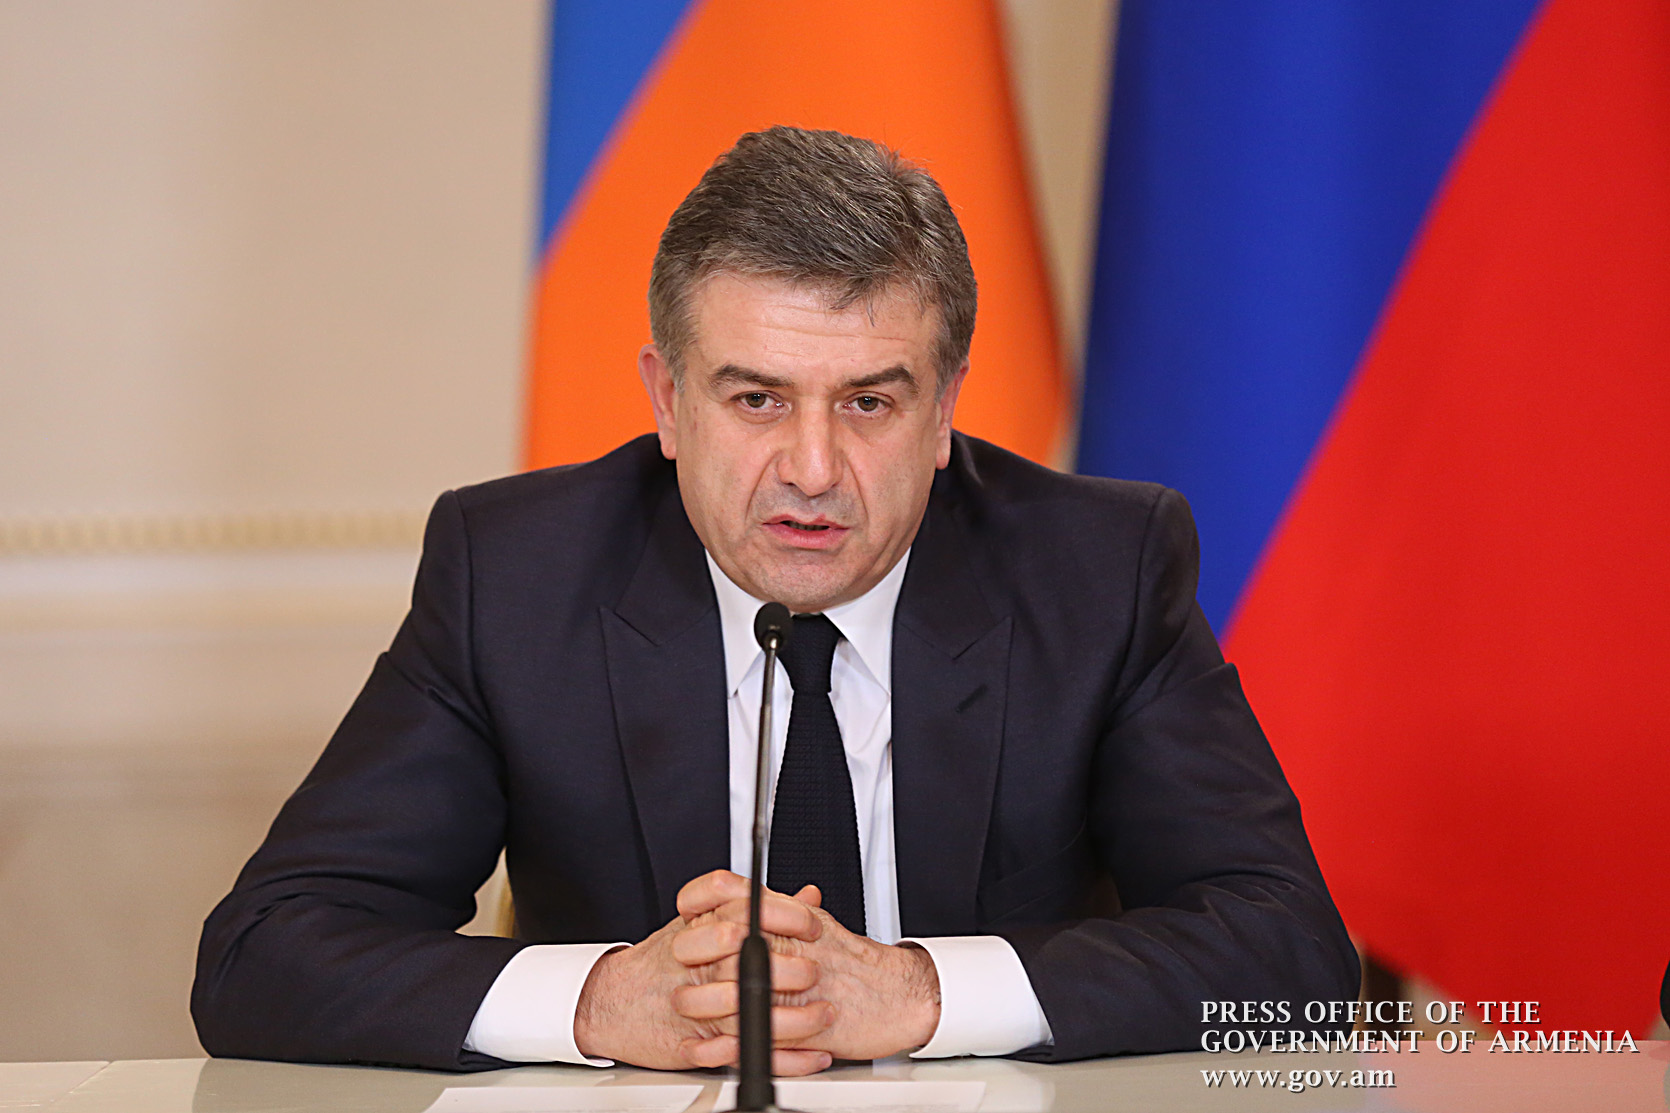 Prime Minister: There is a need in Armenia to simplify the procedure for obtaining permits for the use of limited resources